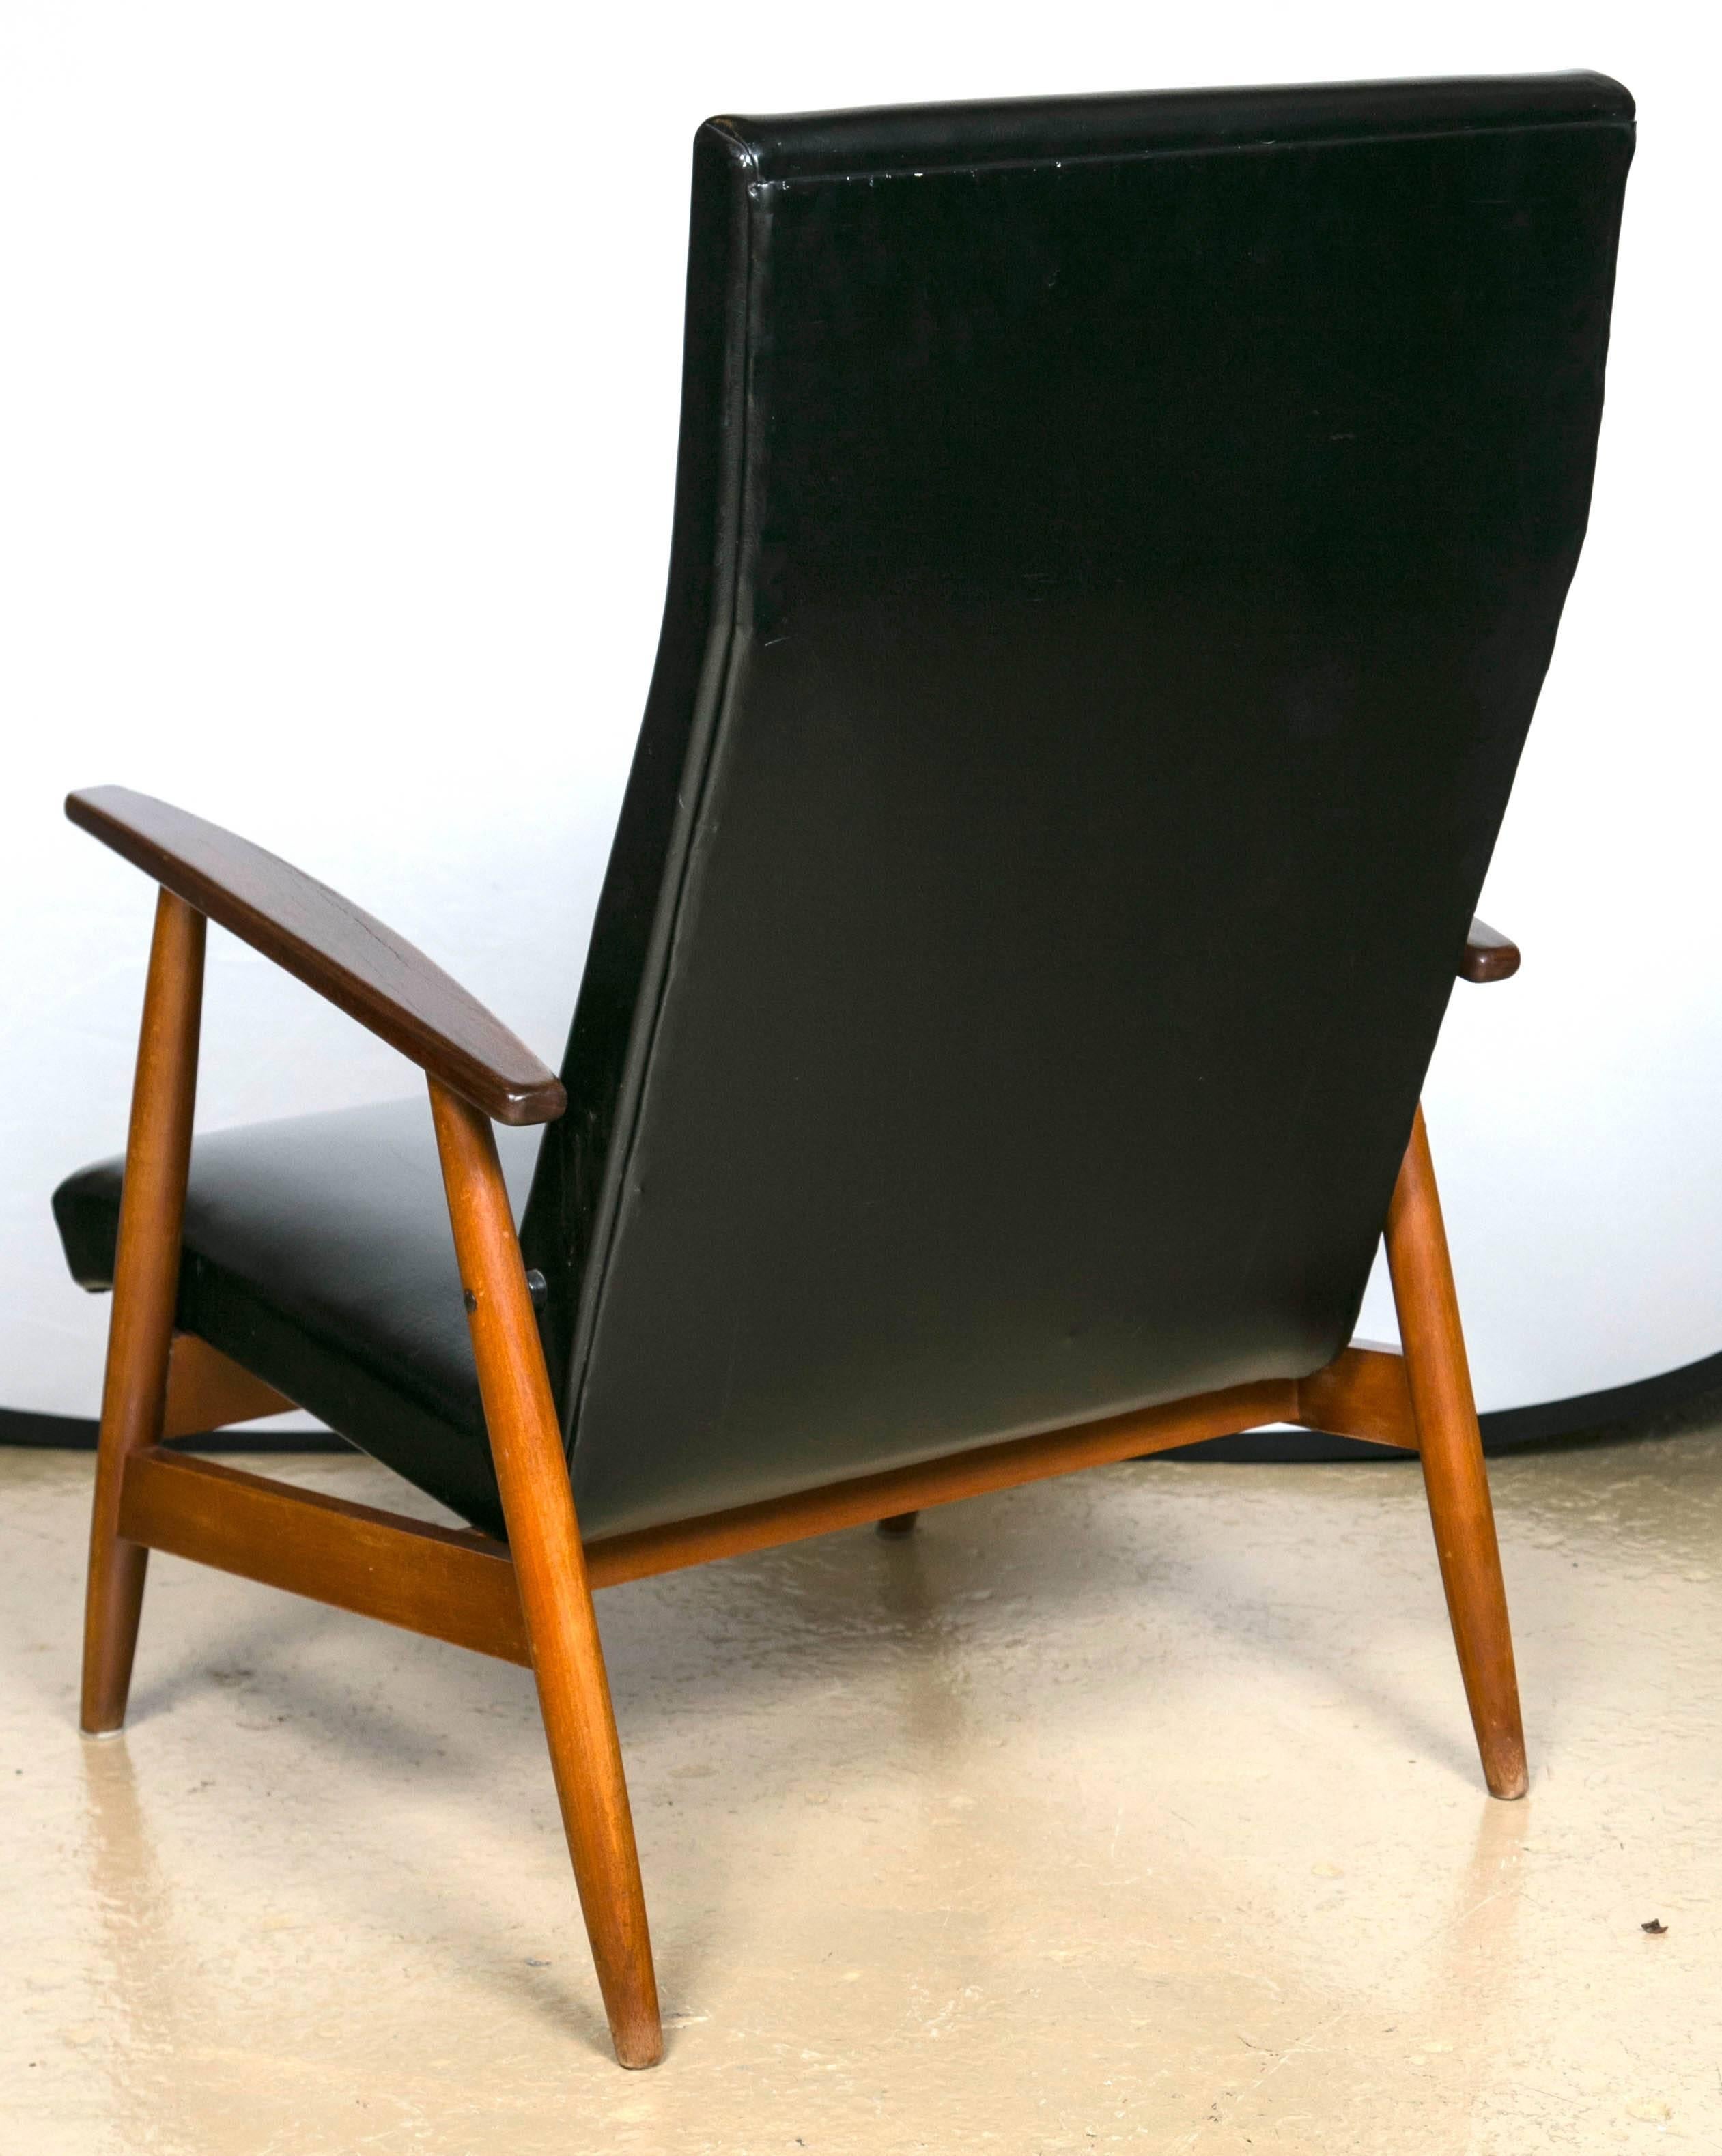 Leather Pair of Mid Century Modern Scandinavian Teak and Black Lounge Chairs For Sale